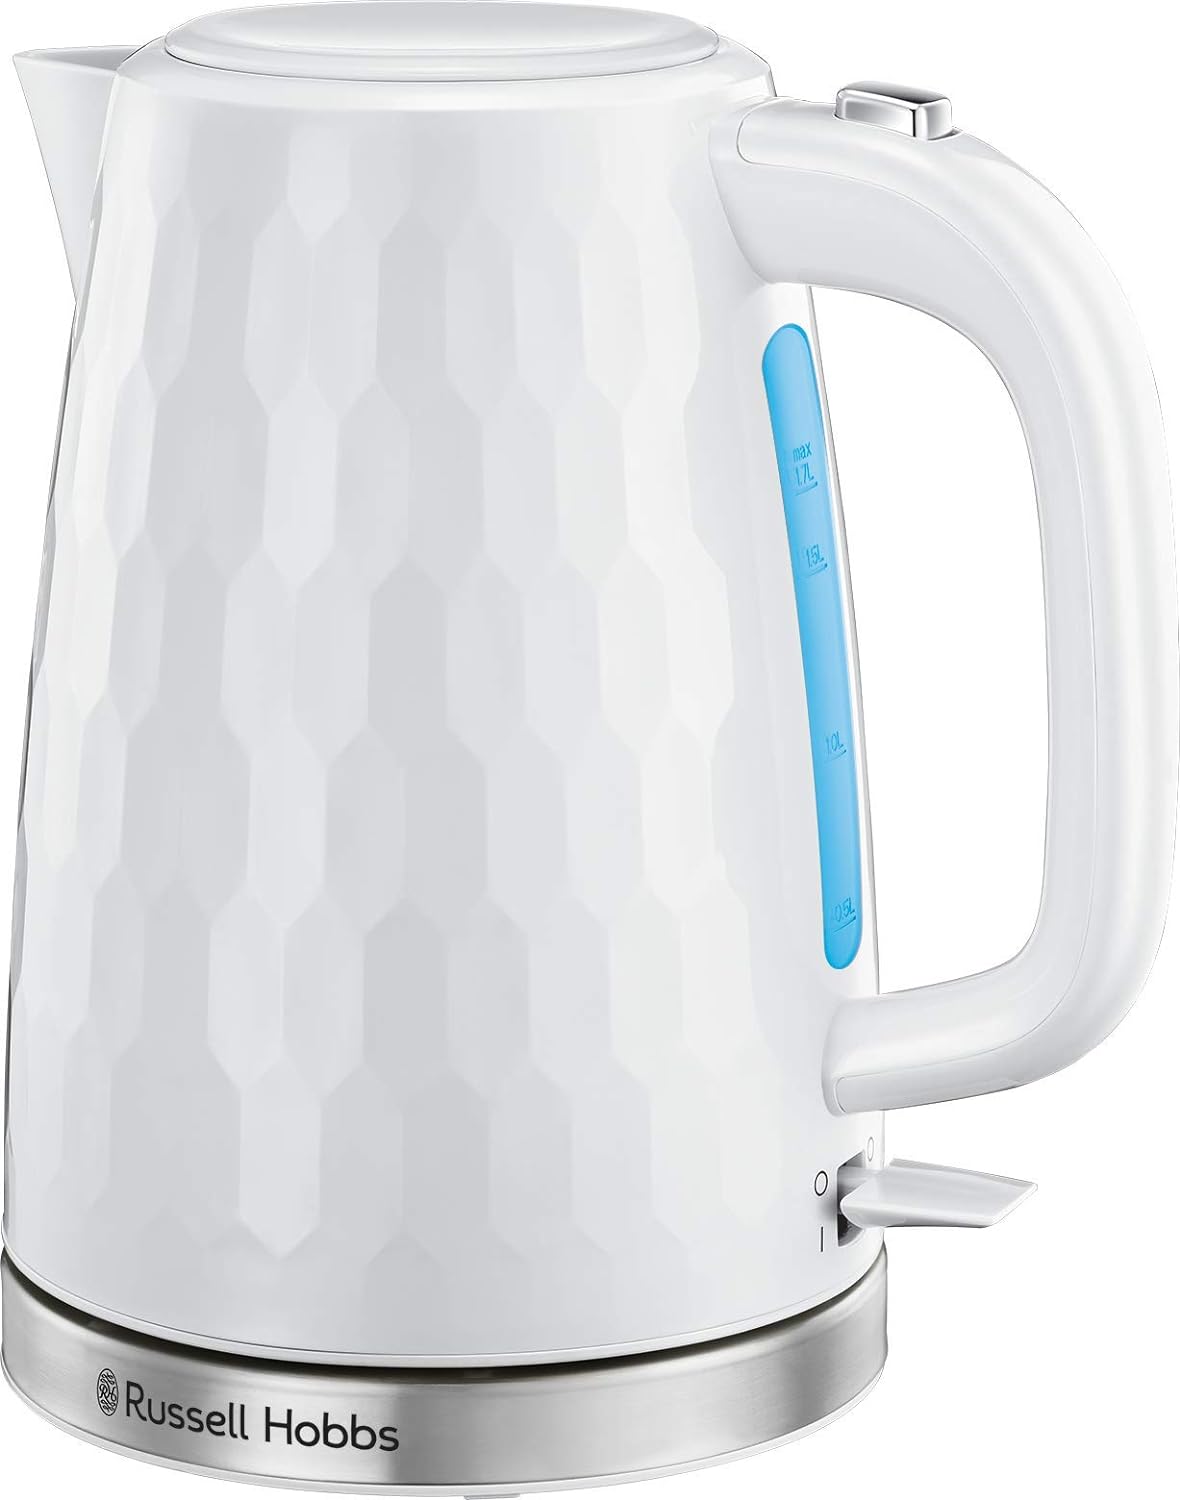 Russell Hobbs Honeycomb Electric 1.7L Cordless Kettle (Fast Boil 3KW, Grey premium plastic, matt & high gloss finish, Removable washable anti - scale filter, Push button lid, Perfect pour spout) 26053 - Amazing Gadgets Outlet